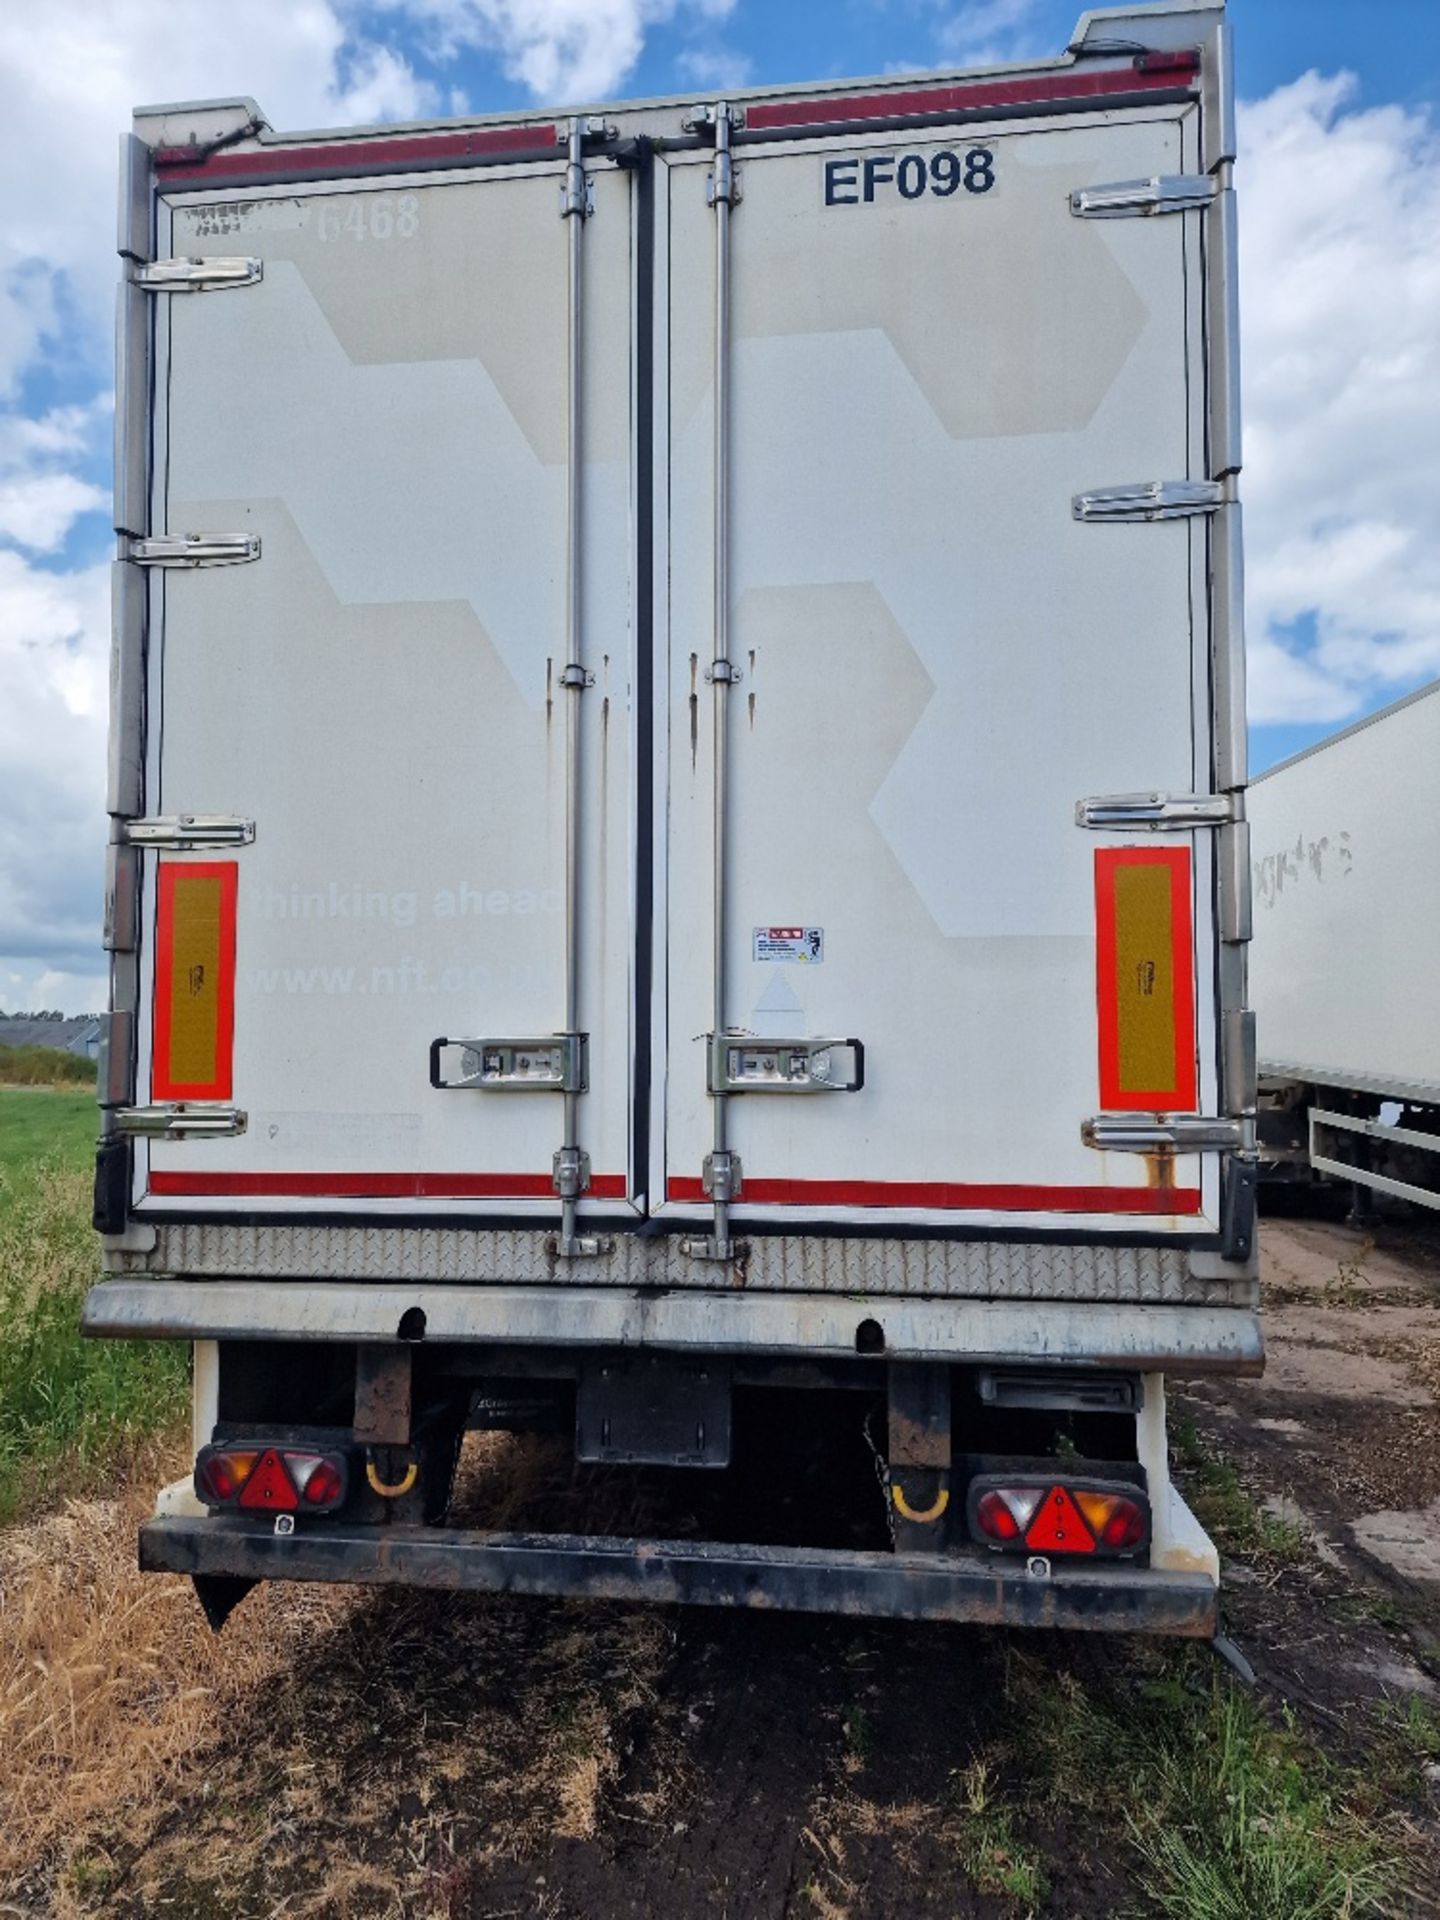 EF098 - 2010 Montracon 13.6m Tri-Axle Refrigerated Trailer - Image 8 of 19